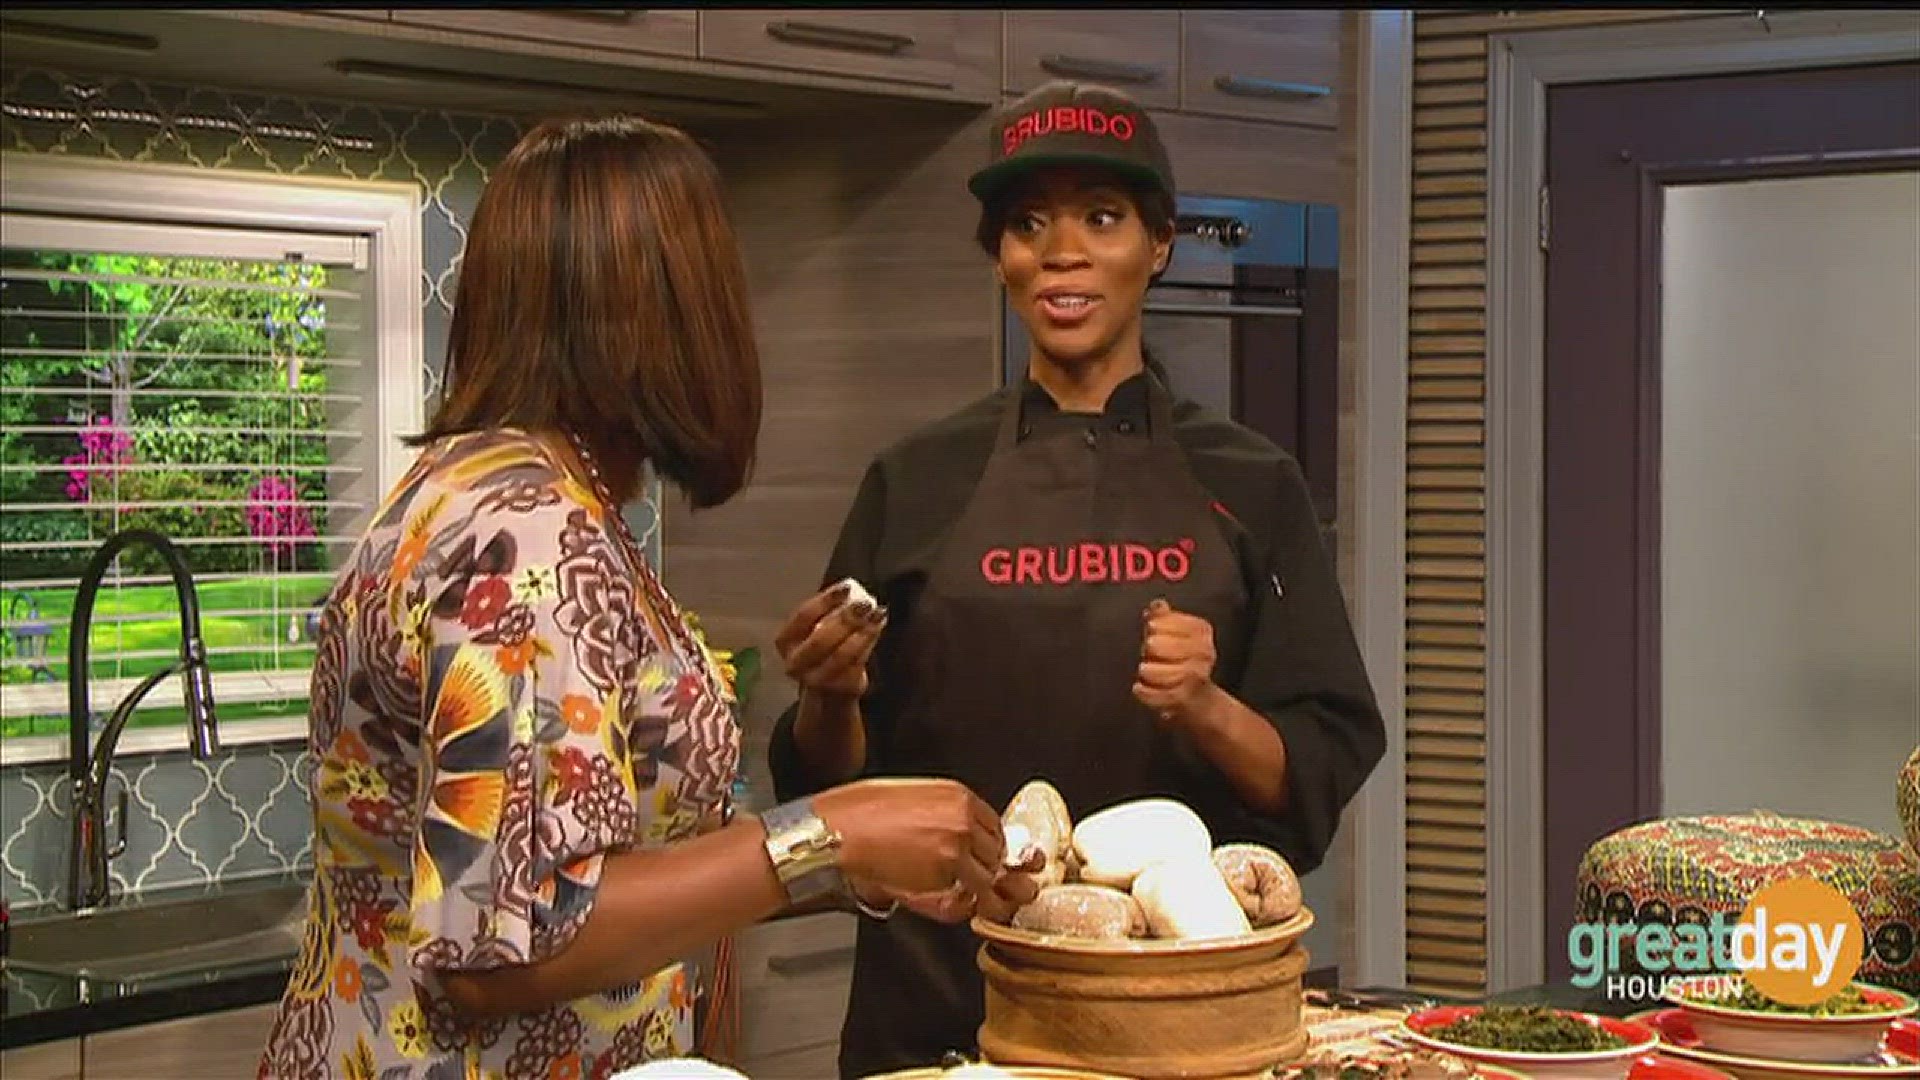 Michelle Kavachi Unegbu, founder of Grubido, demonstrates how the African dish, Fufu, is eaten.